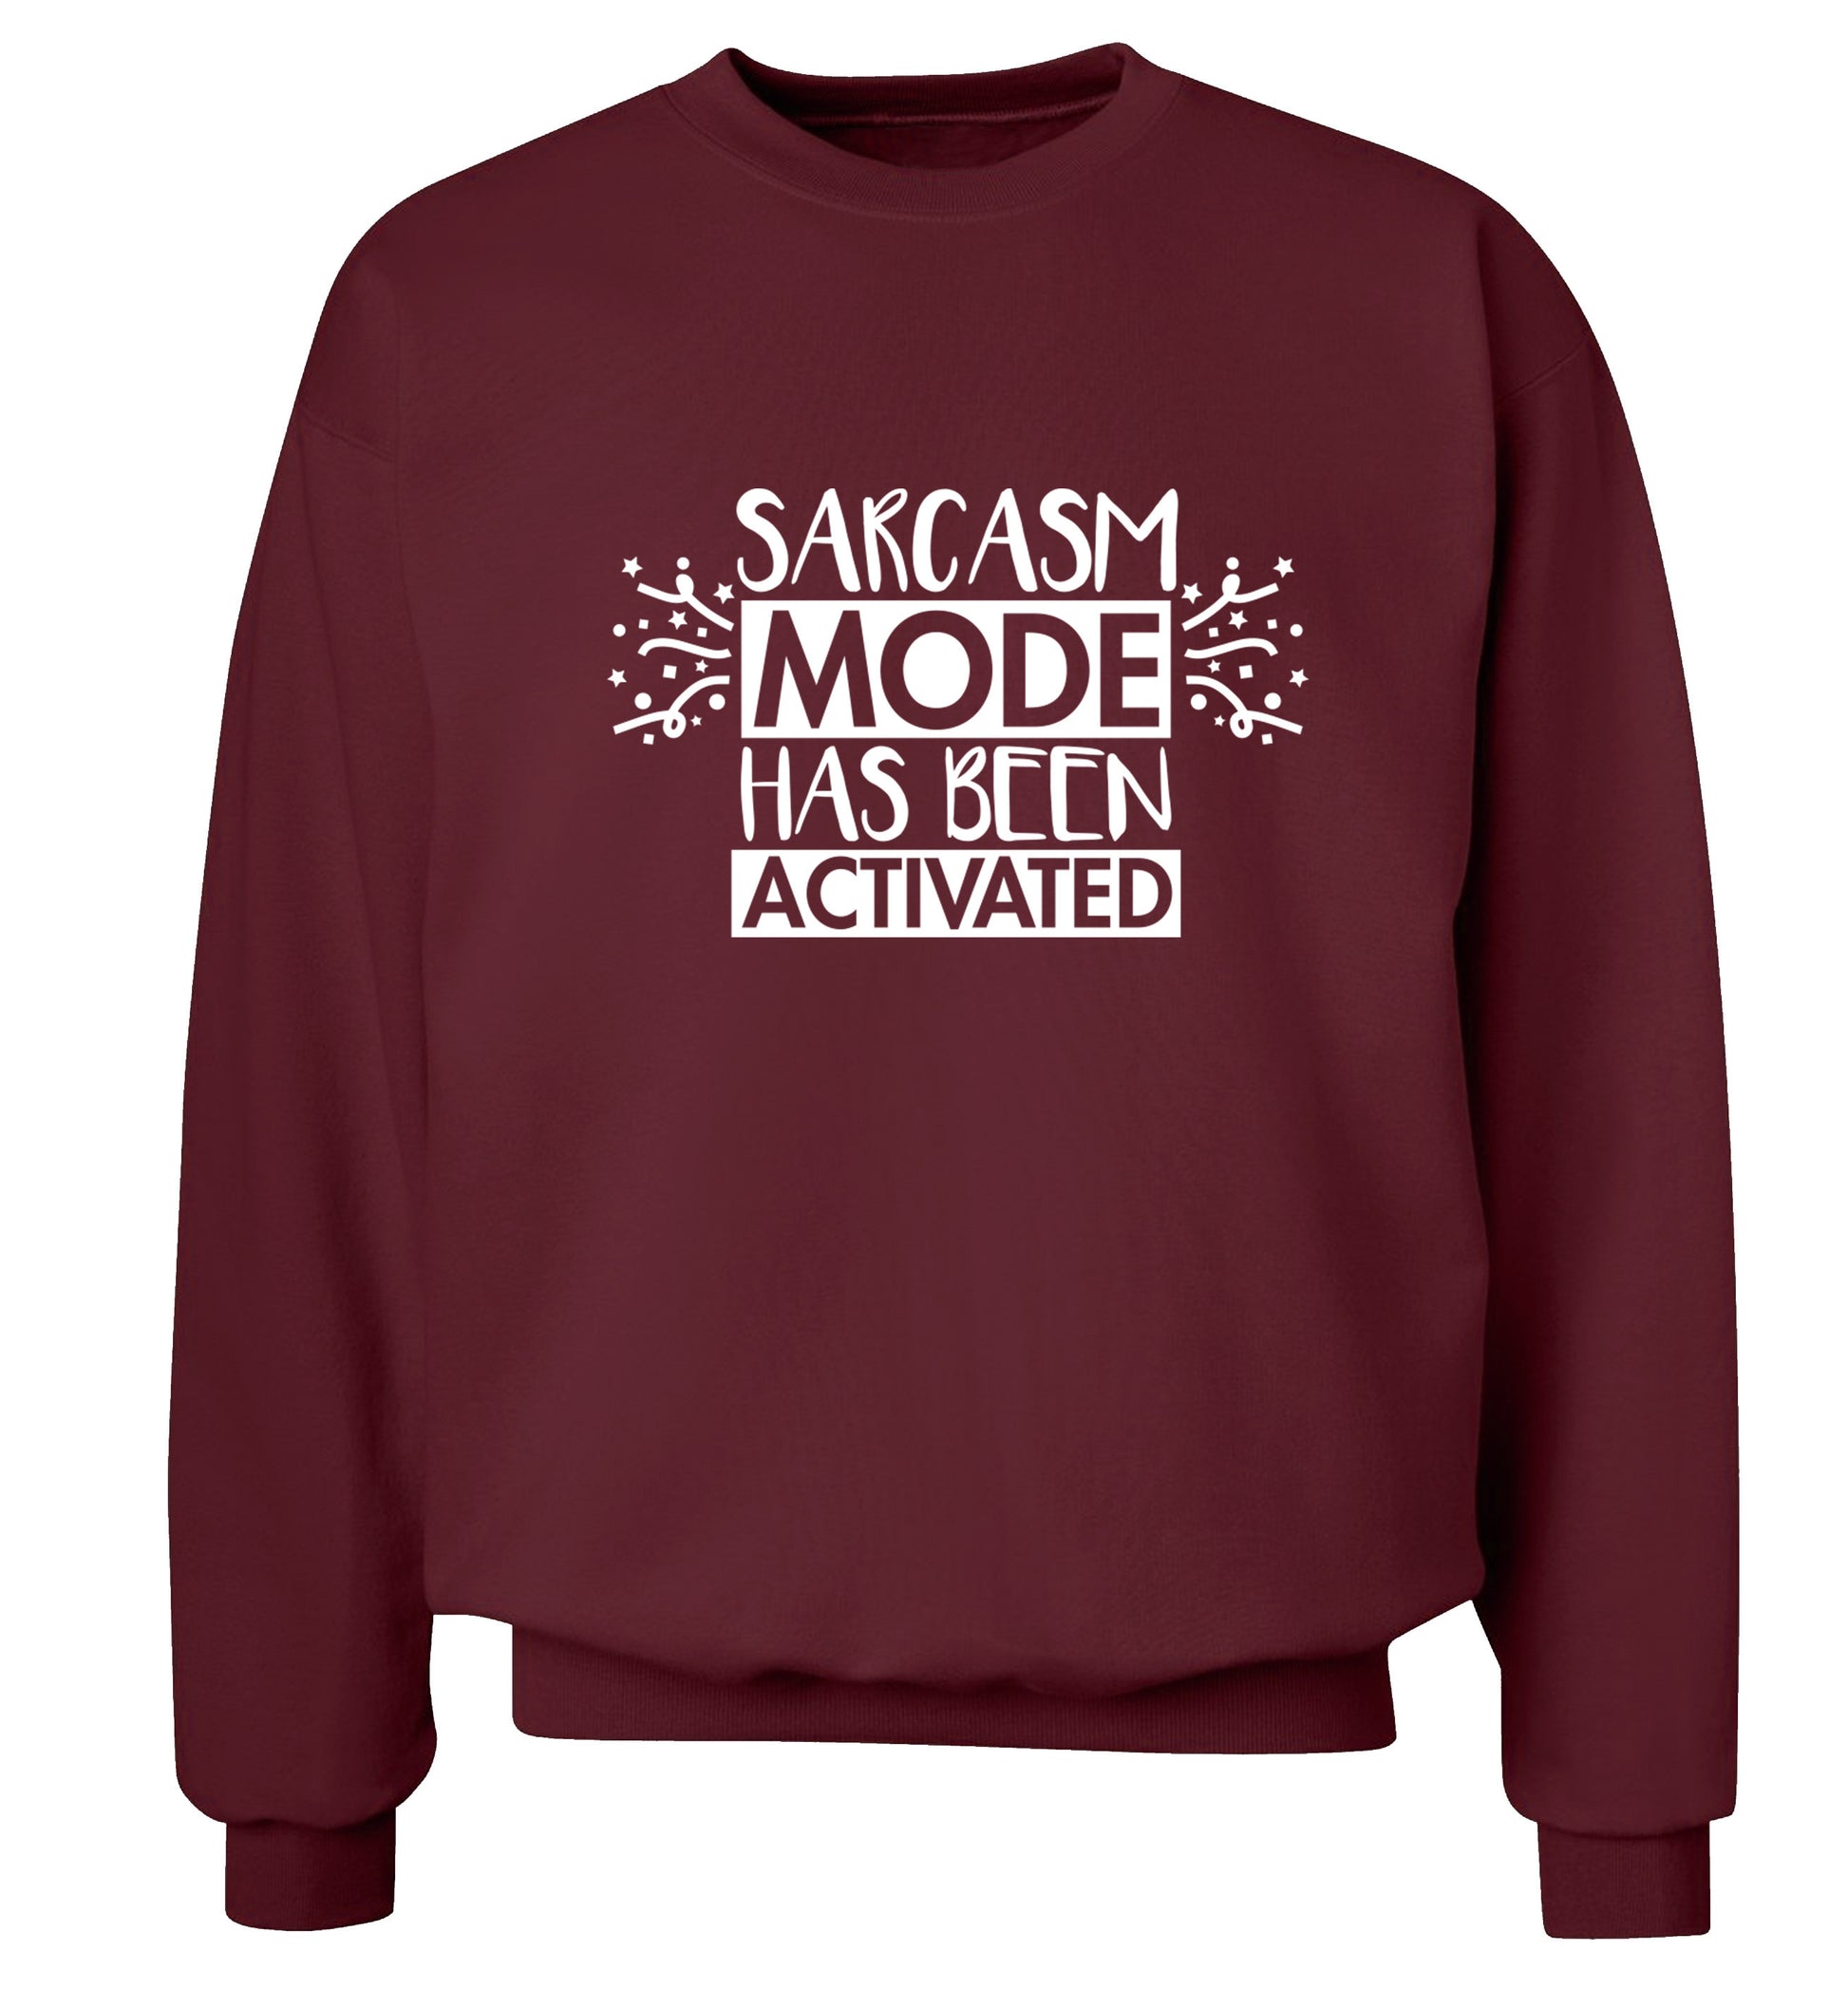 Sarcarsm mode has been activated Adult's unisex maroon Sweater 2XL